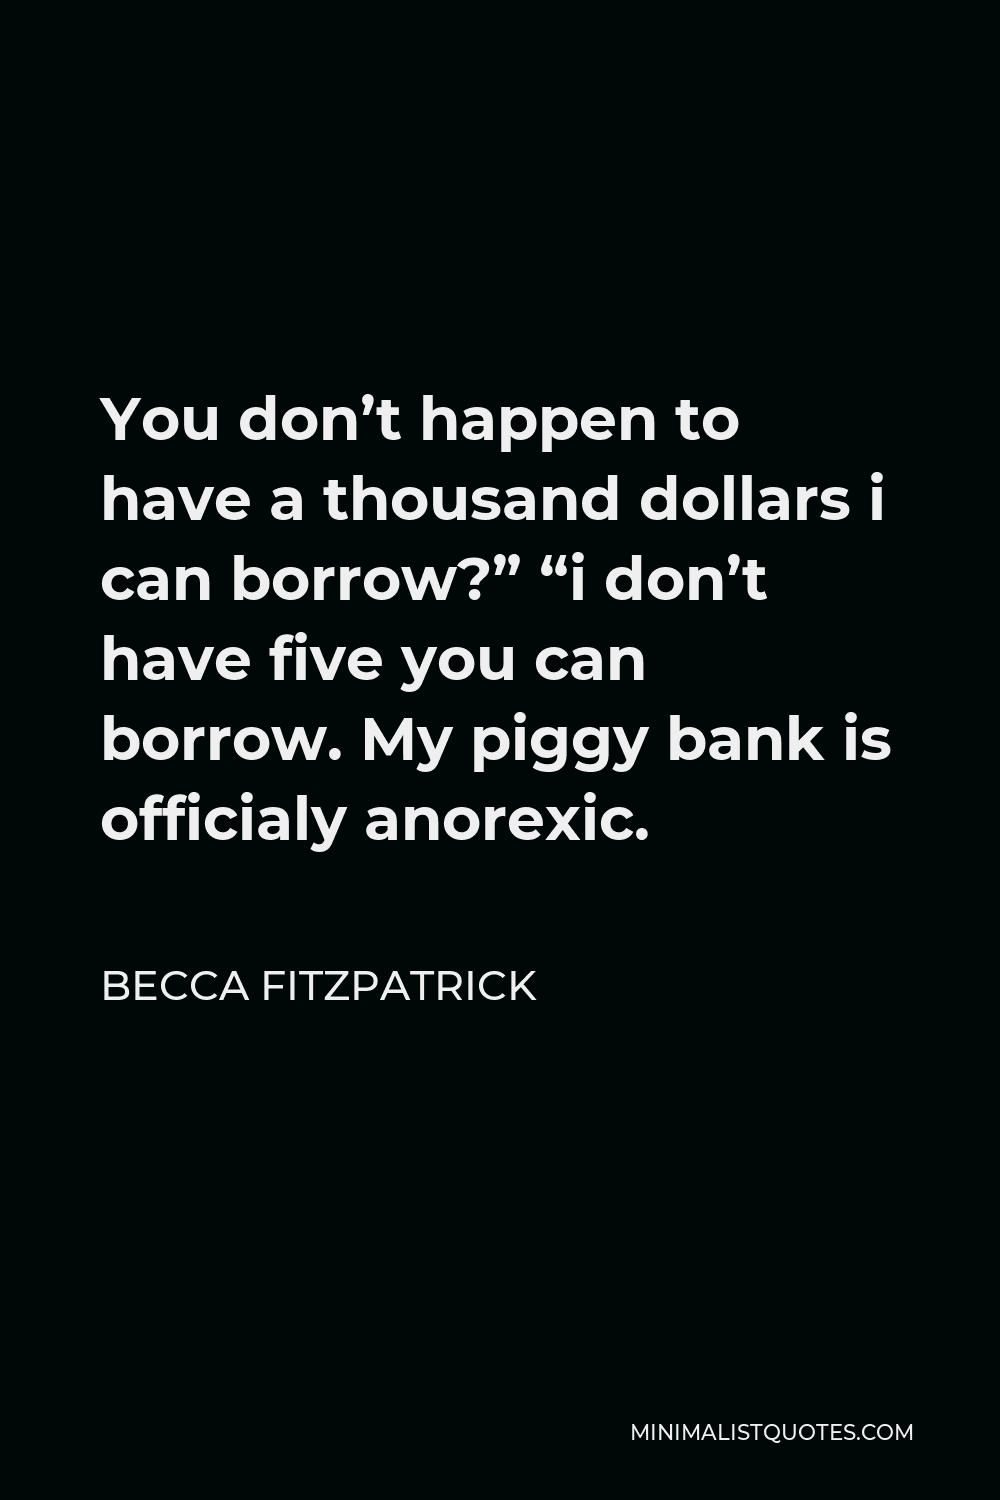 Becca Fitzpatrick Quote - You don’t happen to have a thousand dollars i can borrow?” “i don’t have five you can borrow. My piggy bank is officialy anorexic.